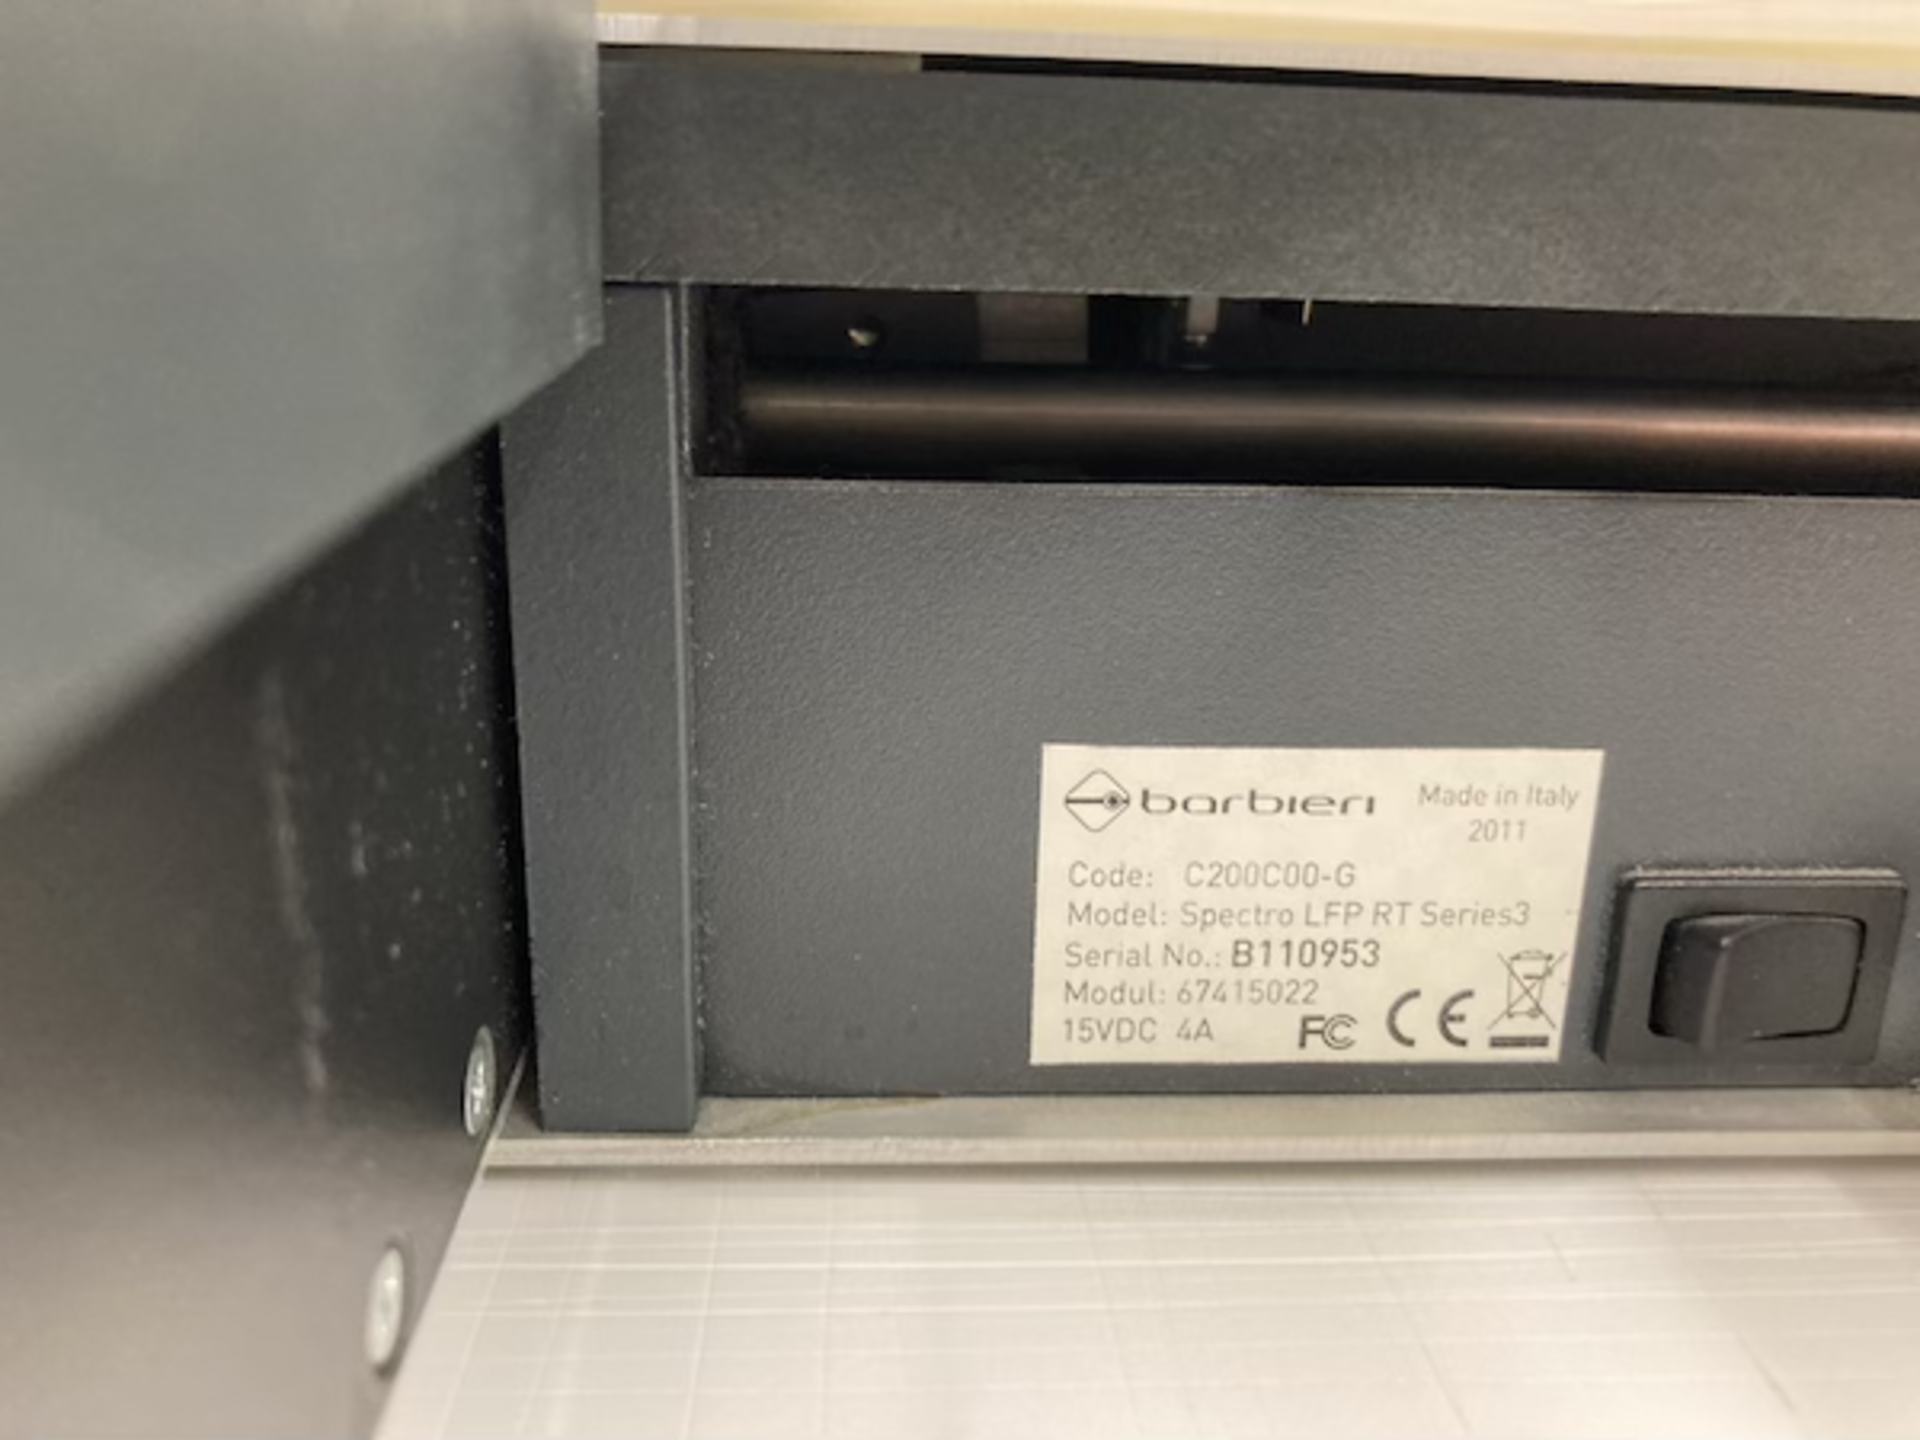 Barbieri Spectro LFP S3 automated reflection transmission spectrophotometer - Image 4 of 4